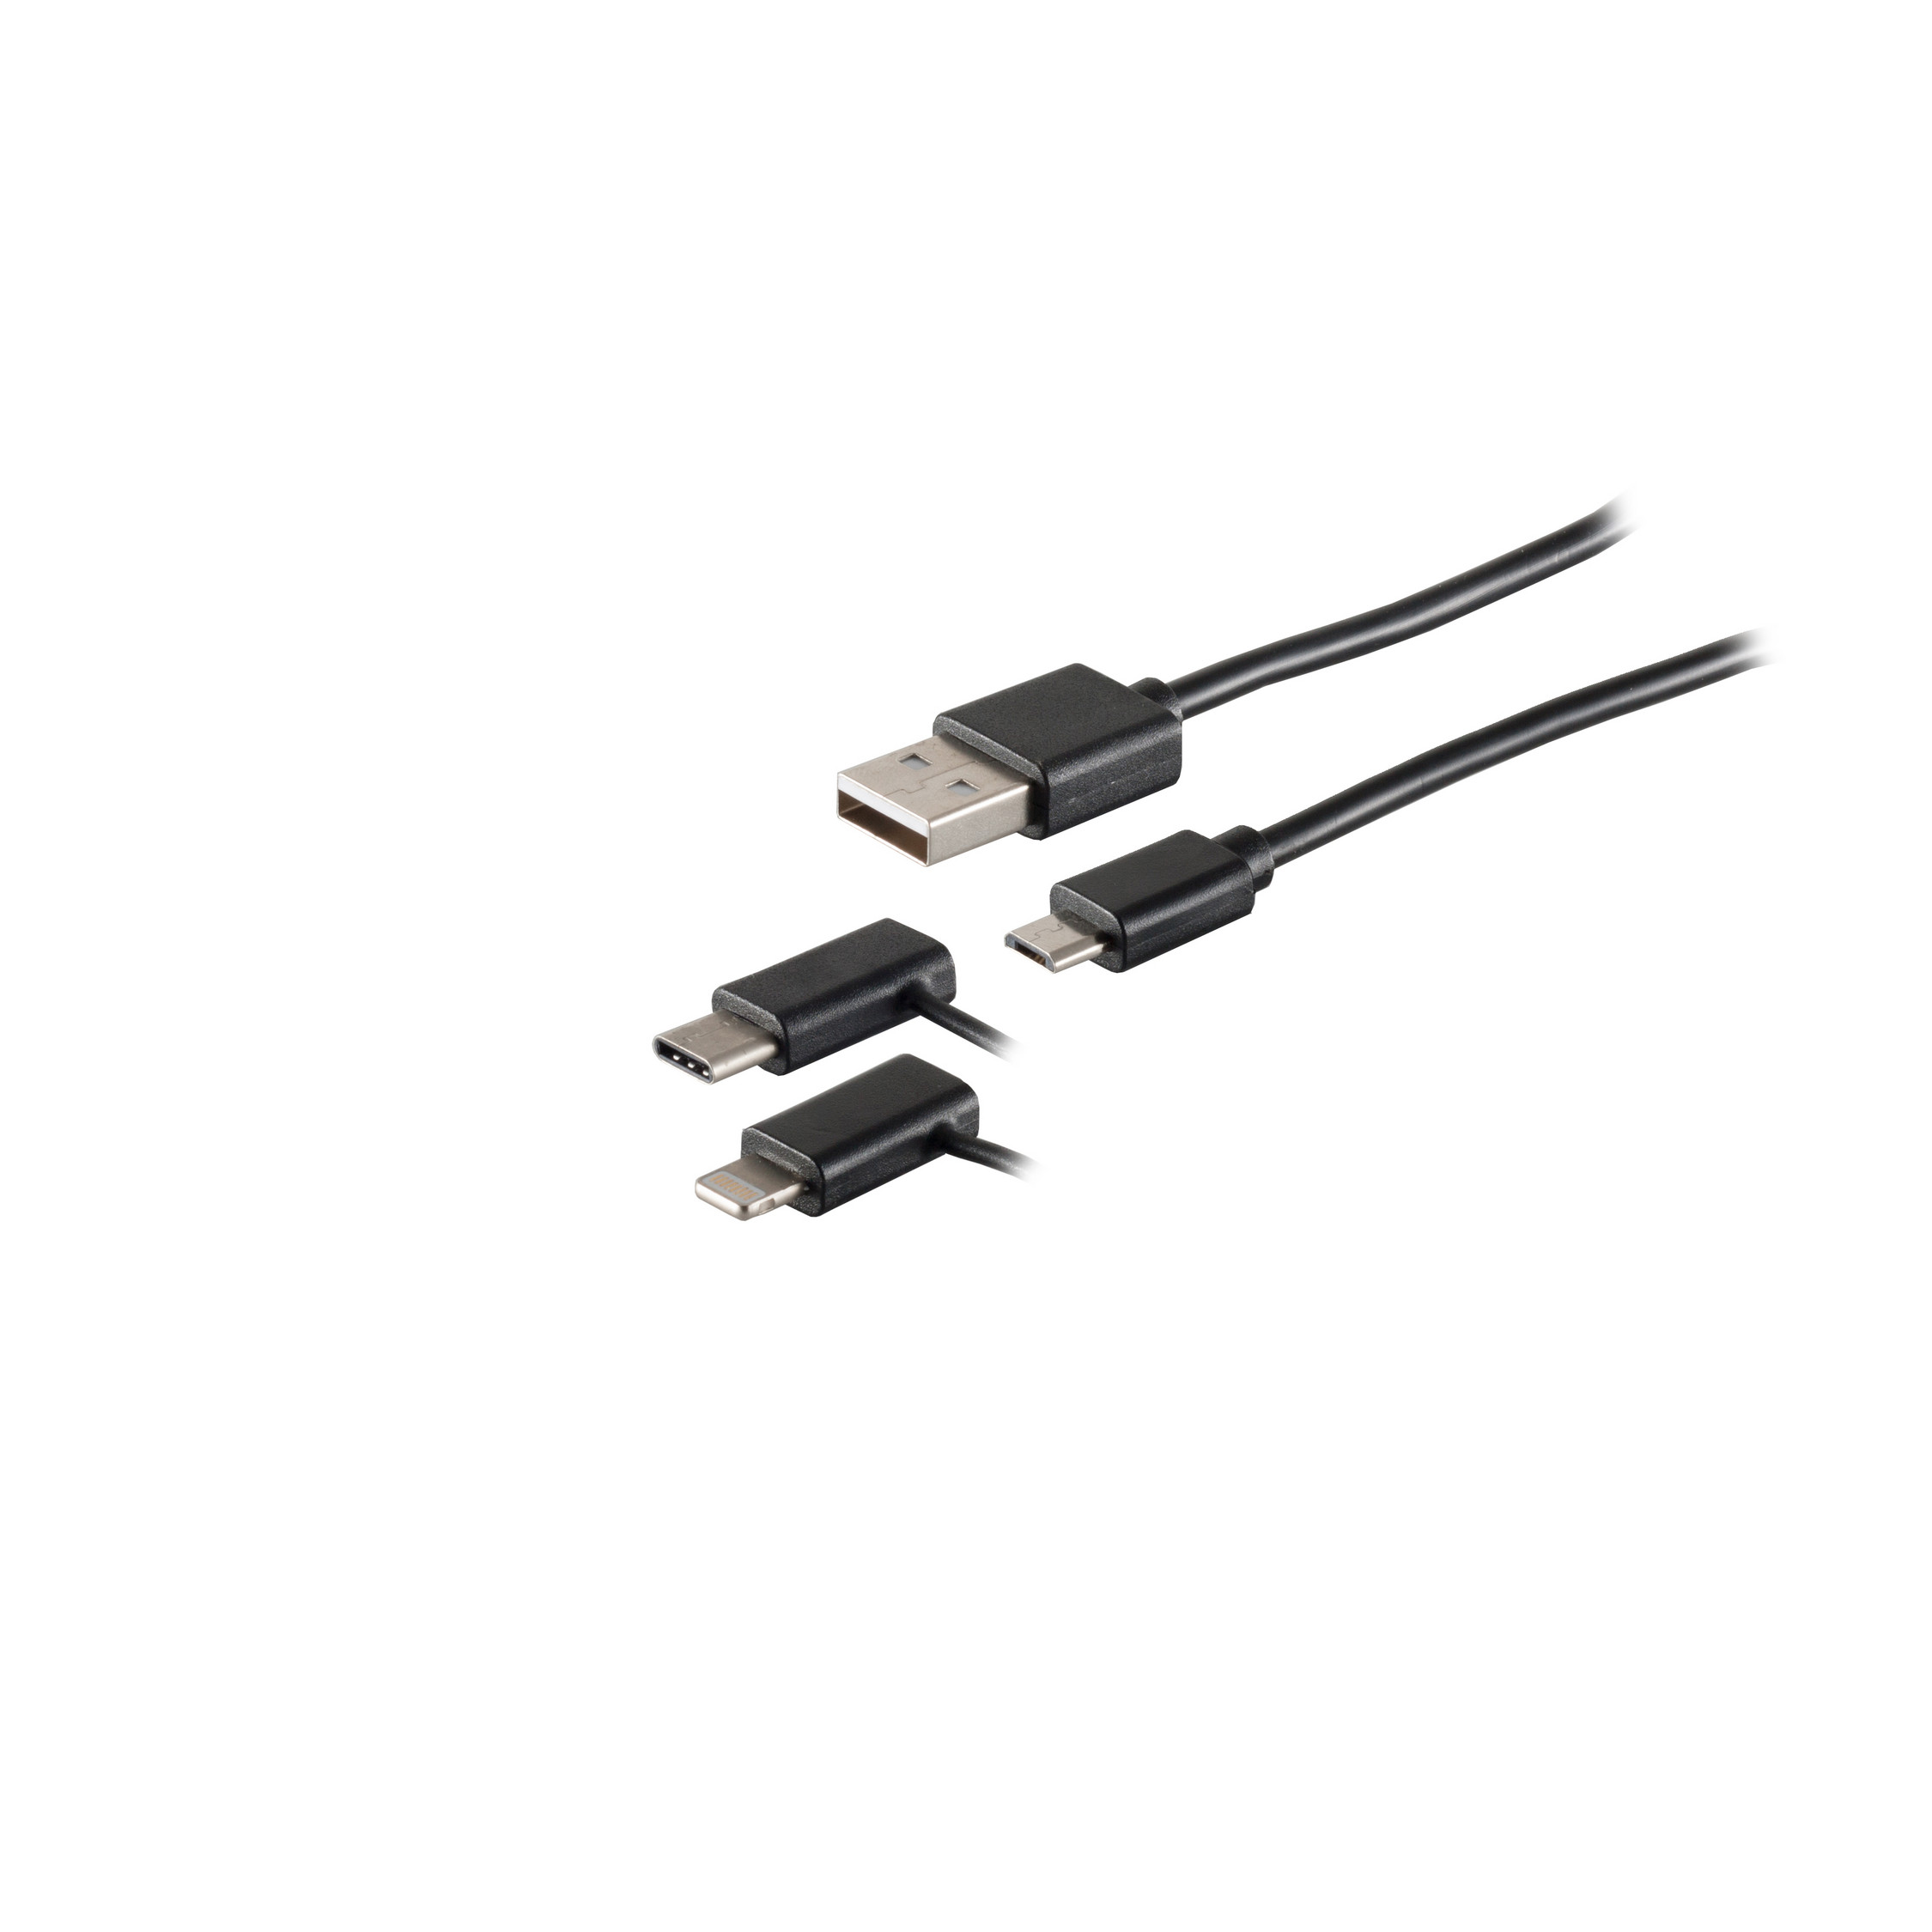 MAXIMUM Micro/Typ Lade-Sync USB CONNECTIVITY S/CONN St.1m USB Kabel C/8-pin Kabel 3in1